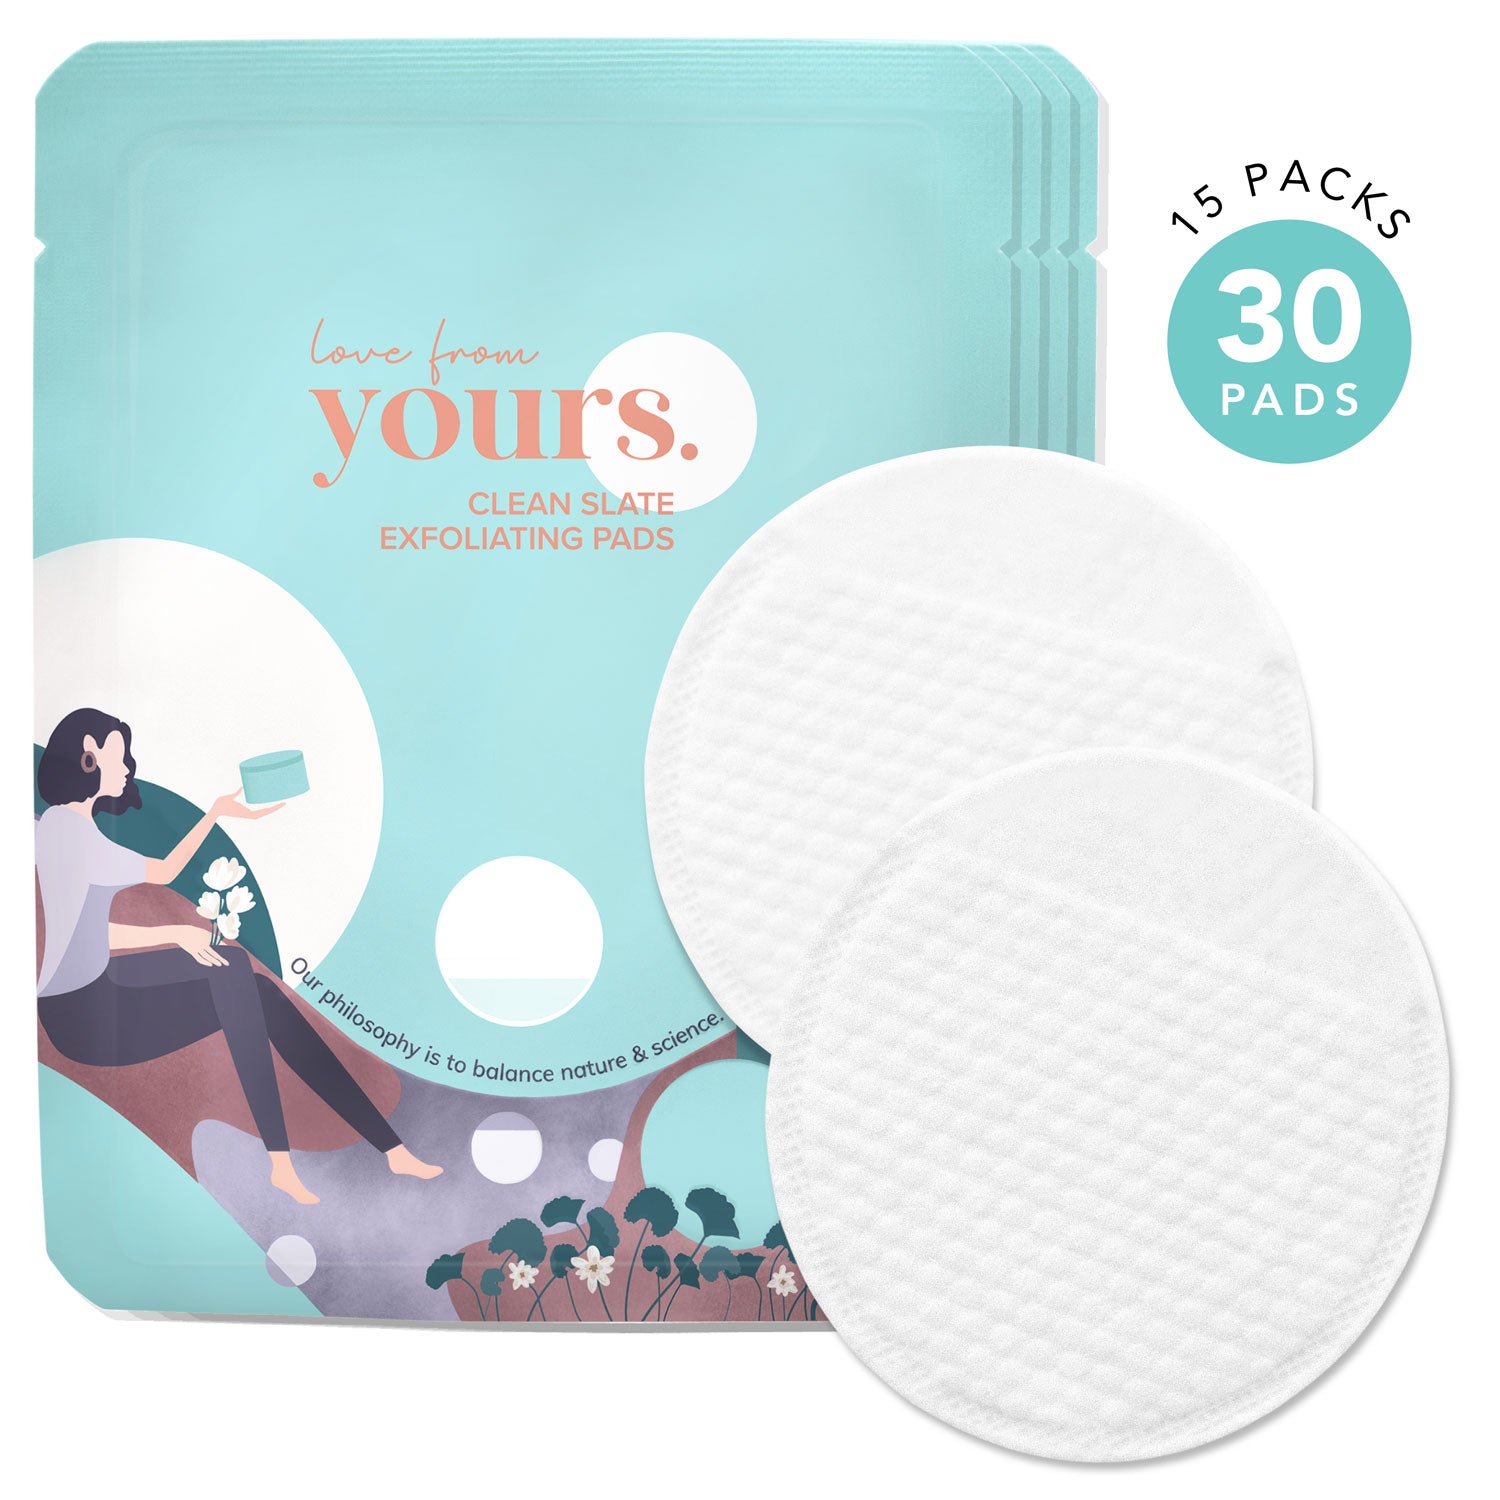 Clean Slate Exfoliating Pads (30 pads)